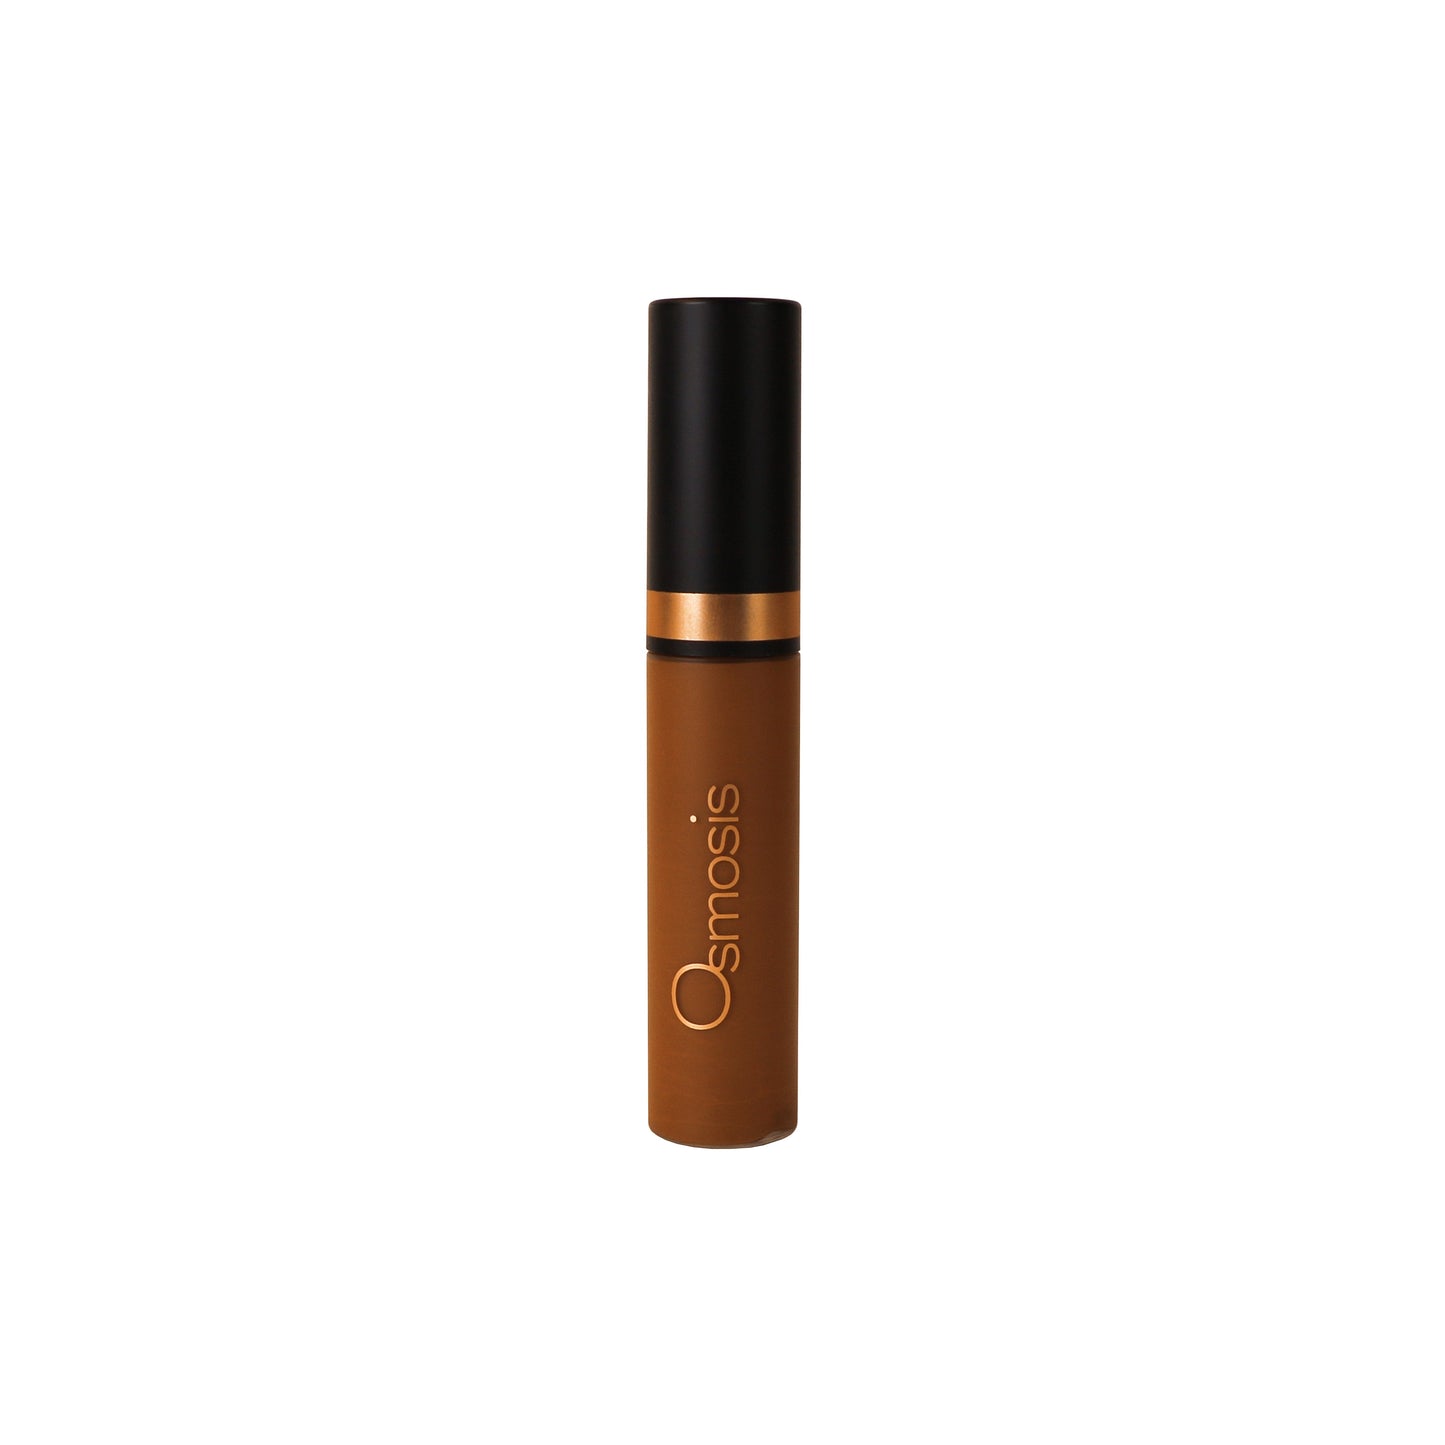 Flawless concealer Java shade closed - Osmosis Beauty